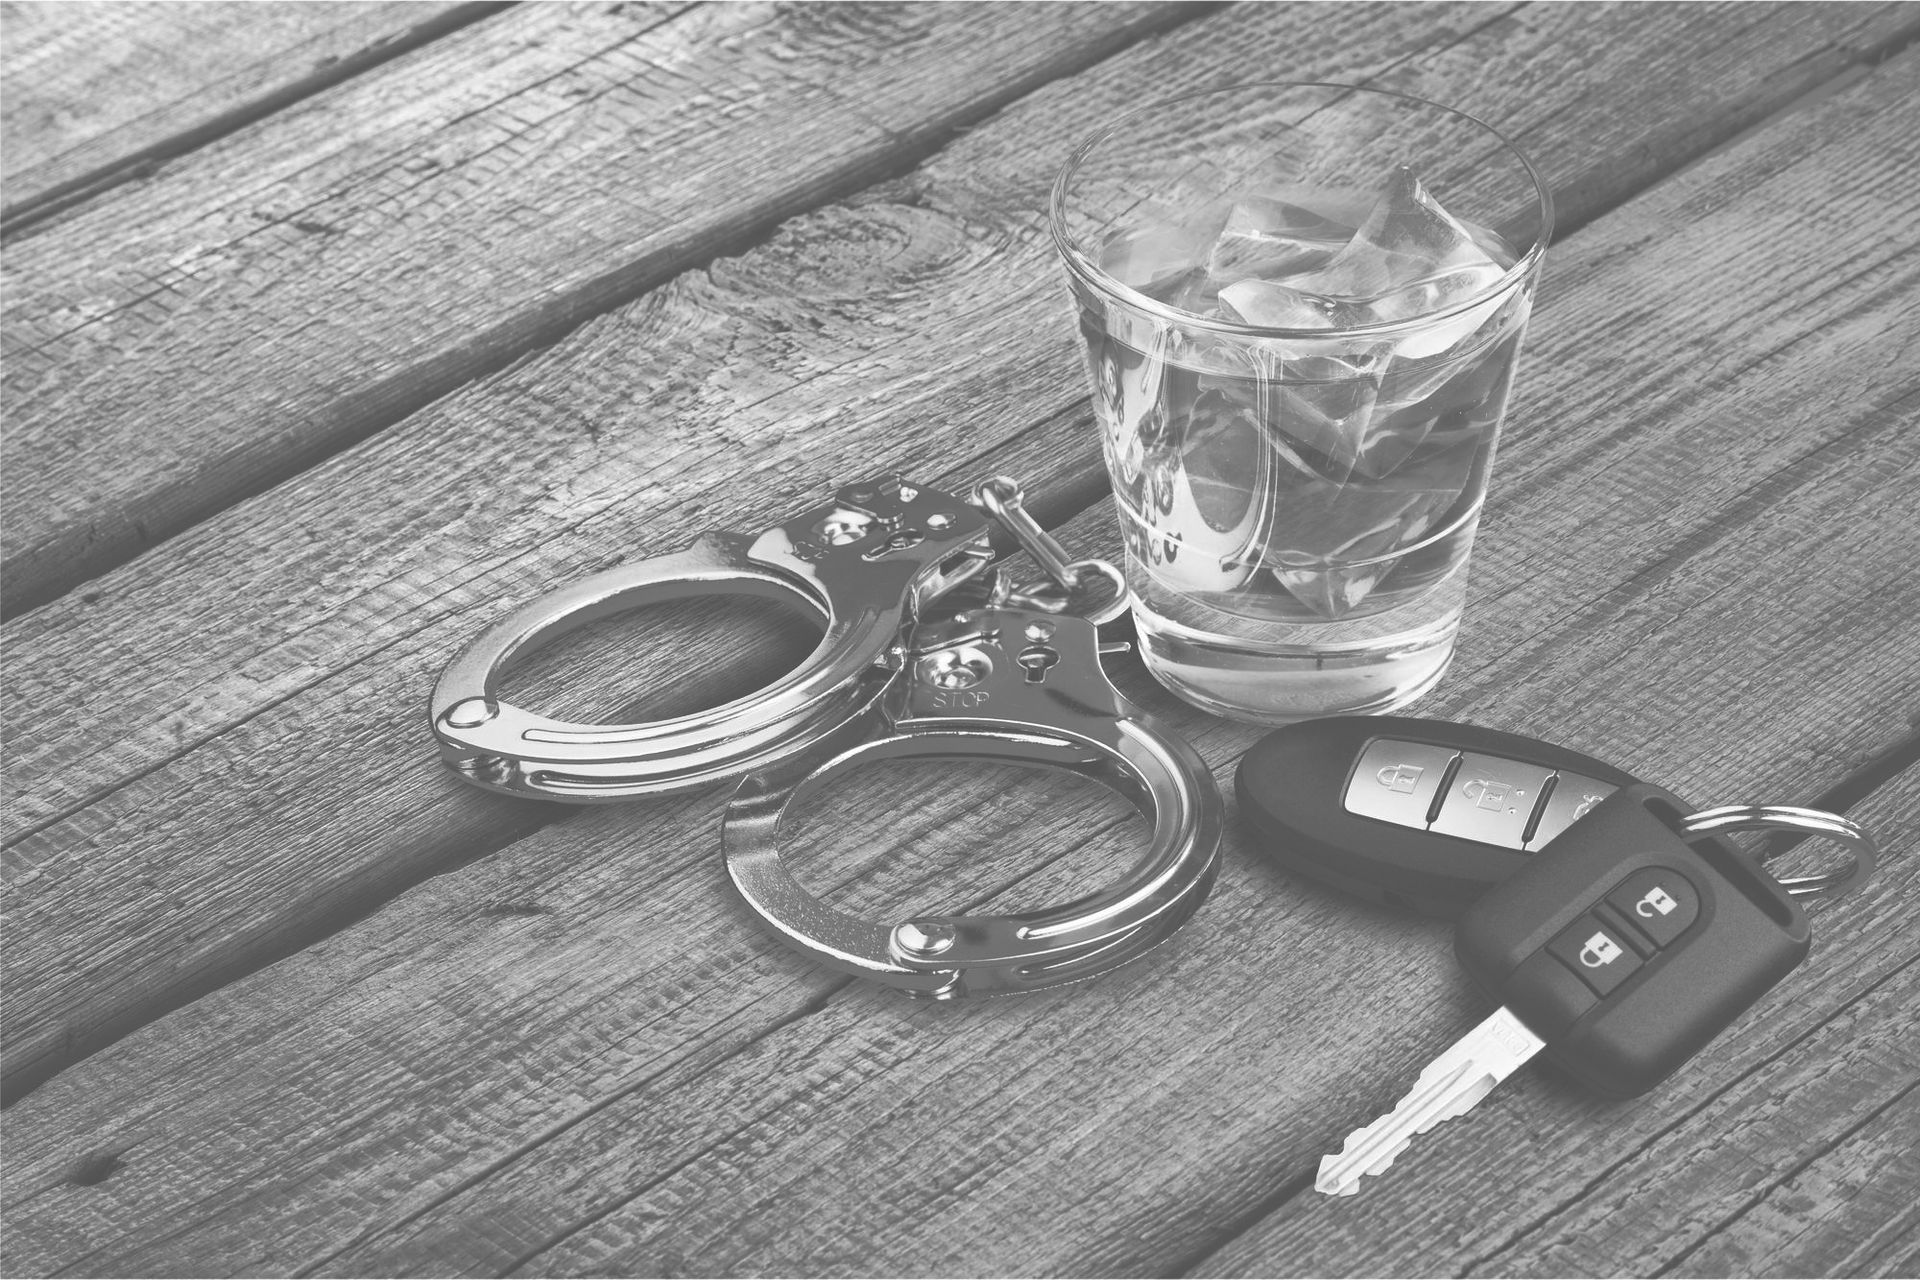 Intoxication Manslaughter Sentence in Texas